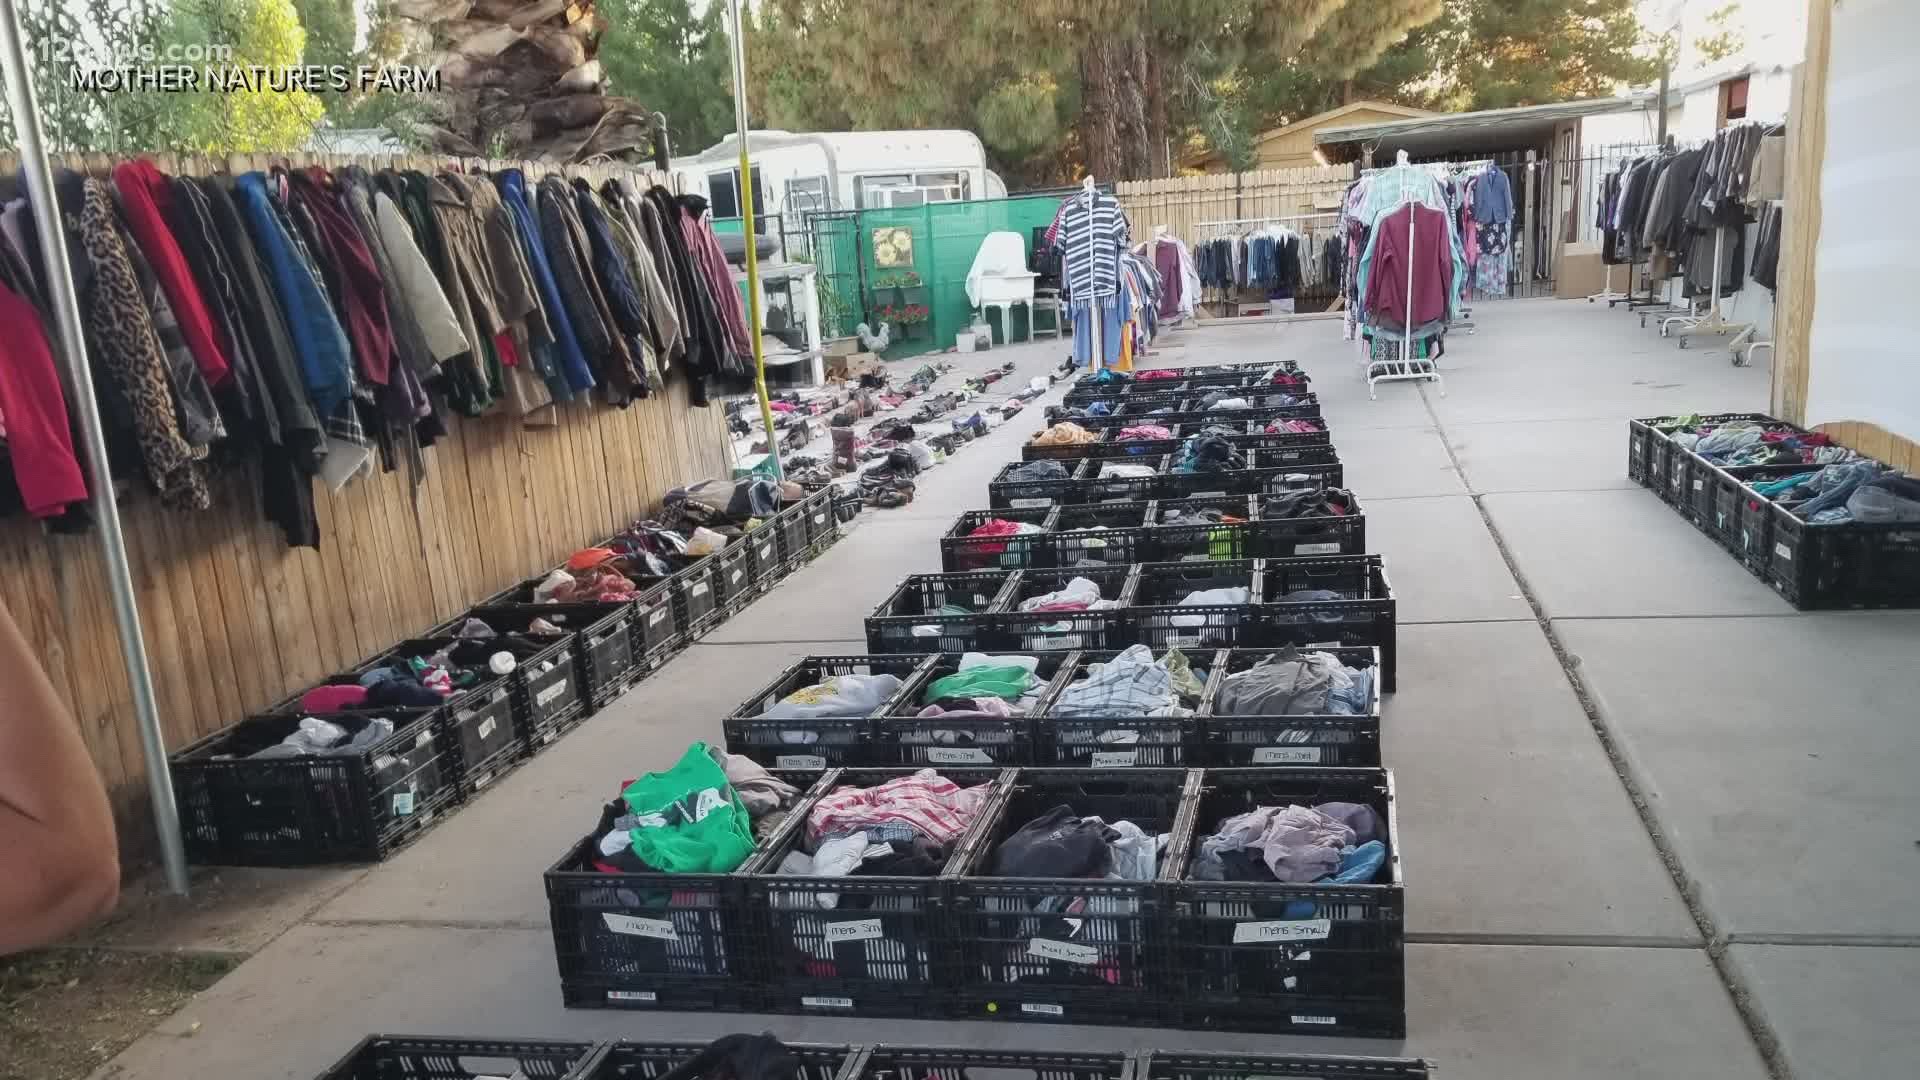 Arizona is reopening, but many are still struggling. Mother Nature's Farm and the ARIS Foundation teamed up to provide a free clothing drive.